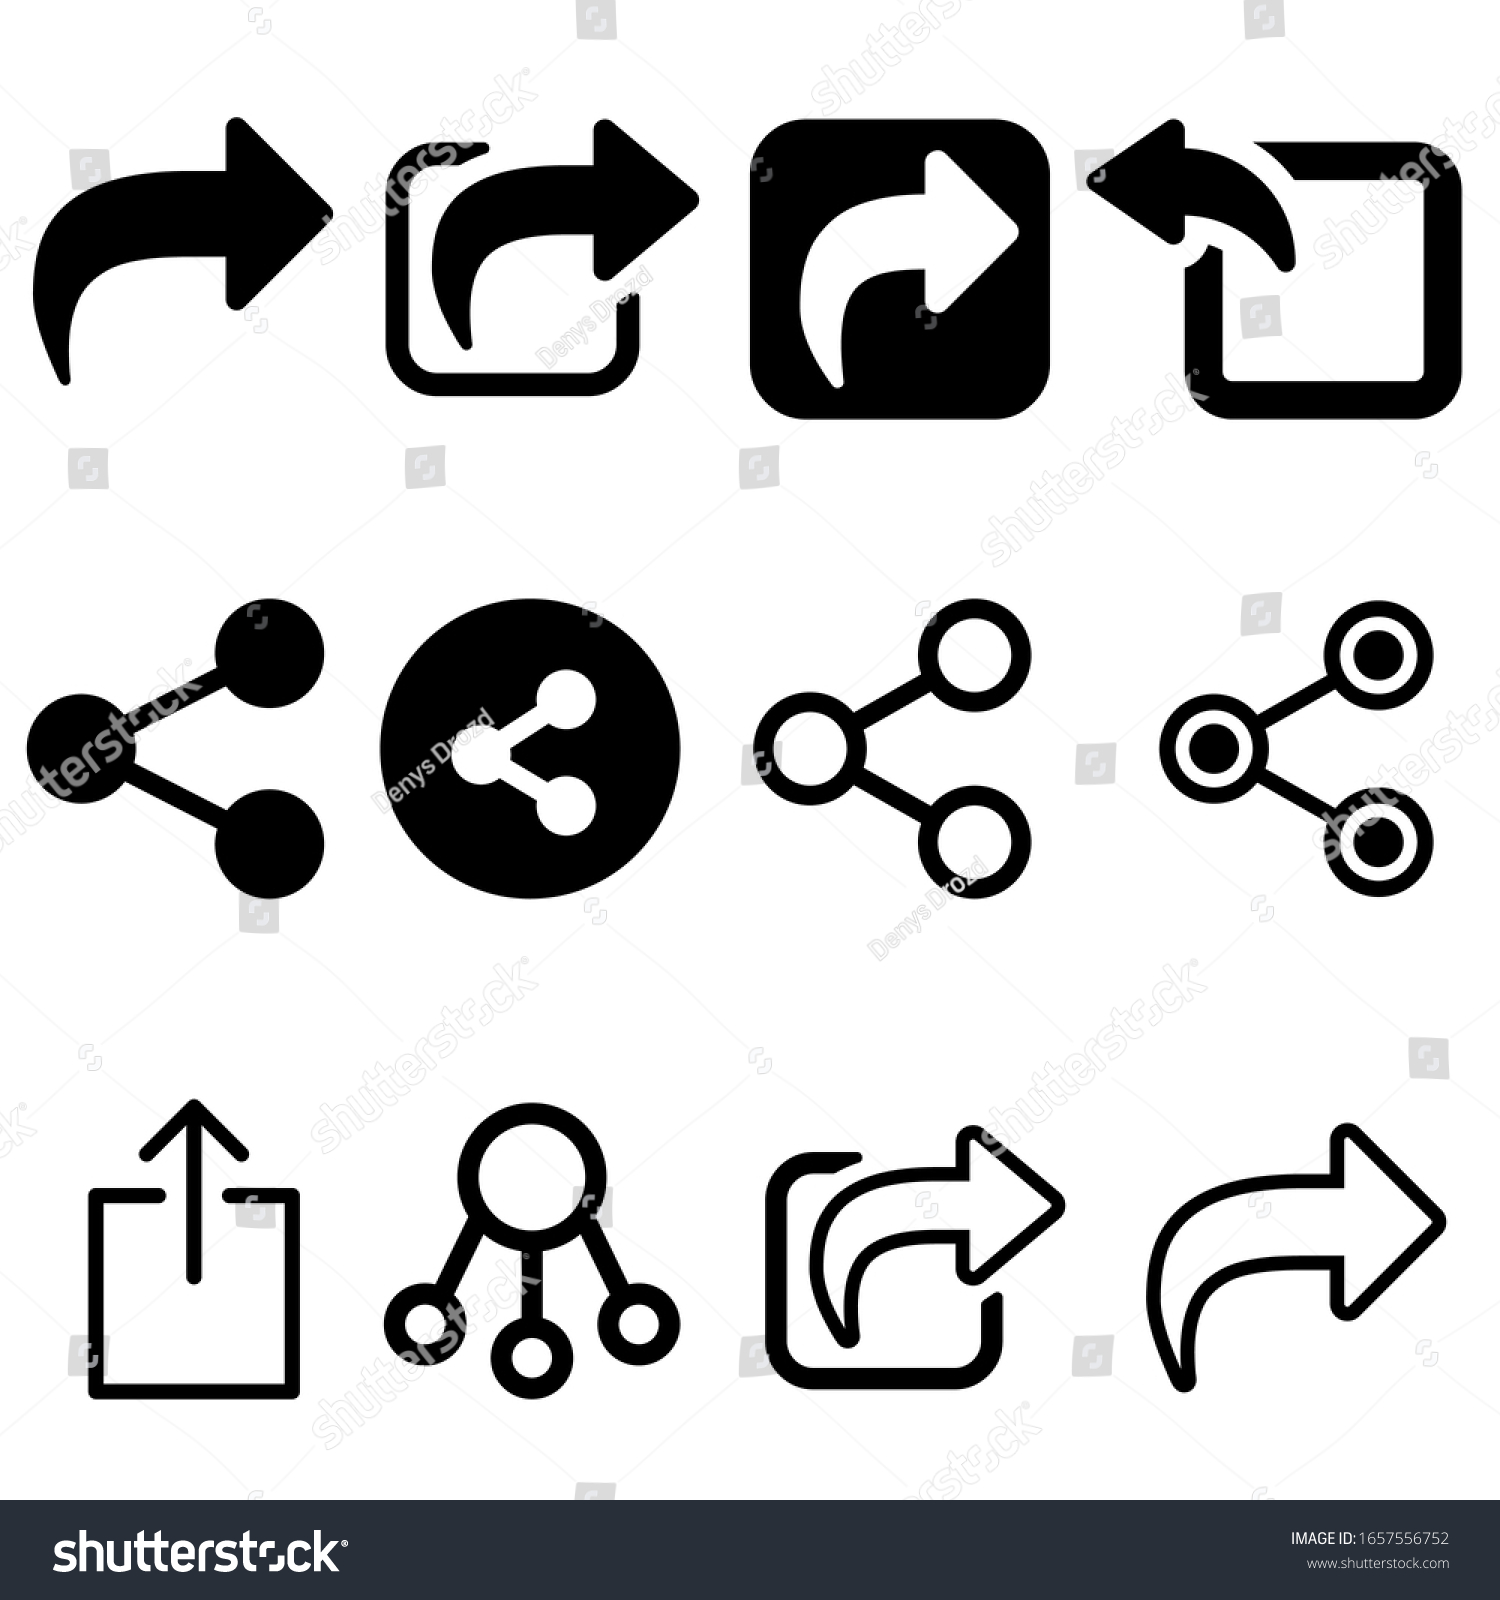 Set of share vector icon. Arrow symbol. button connection illustration sign collection. #1657556752